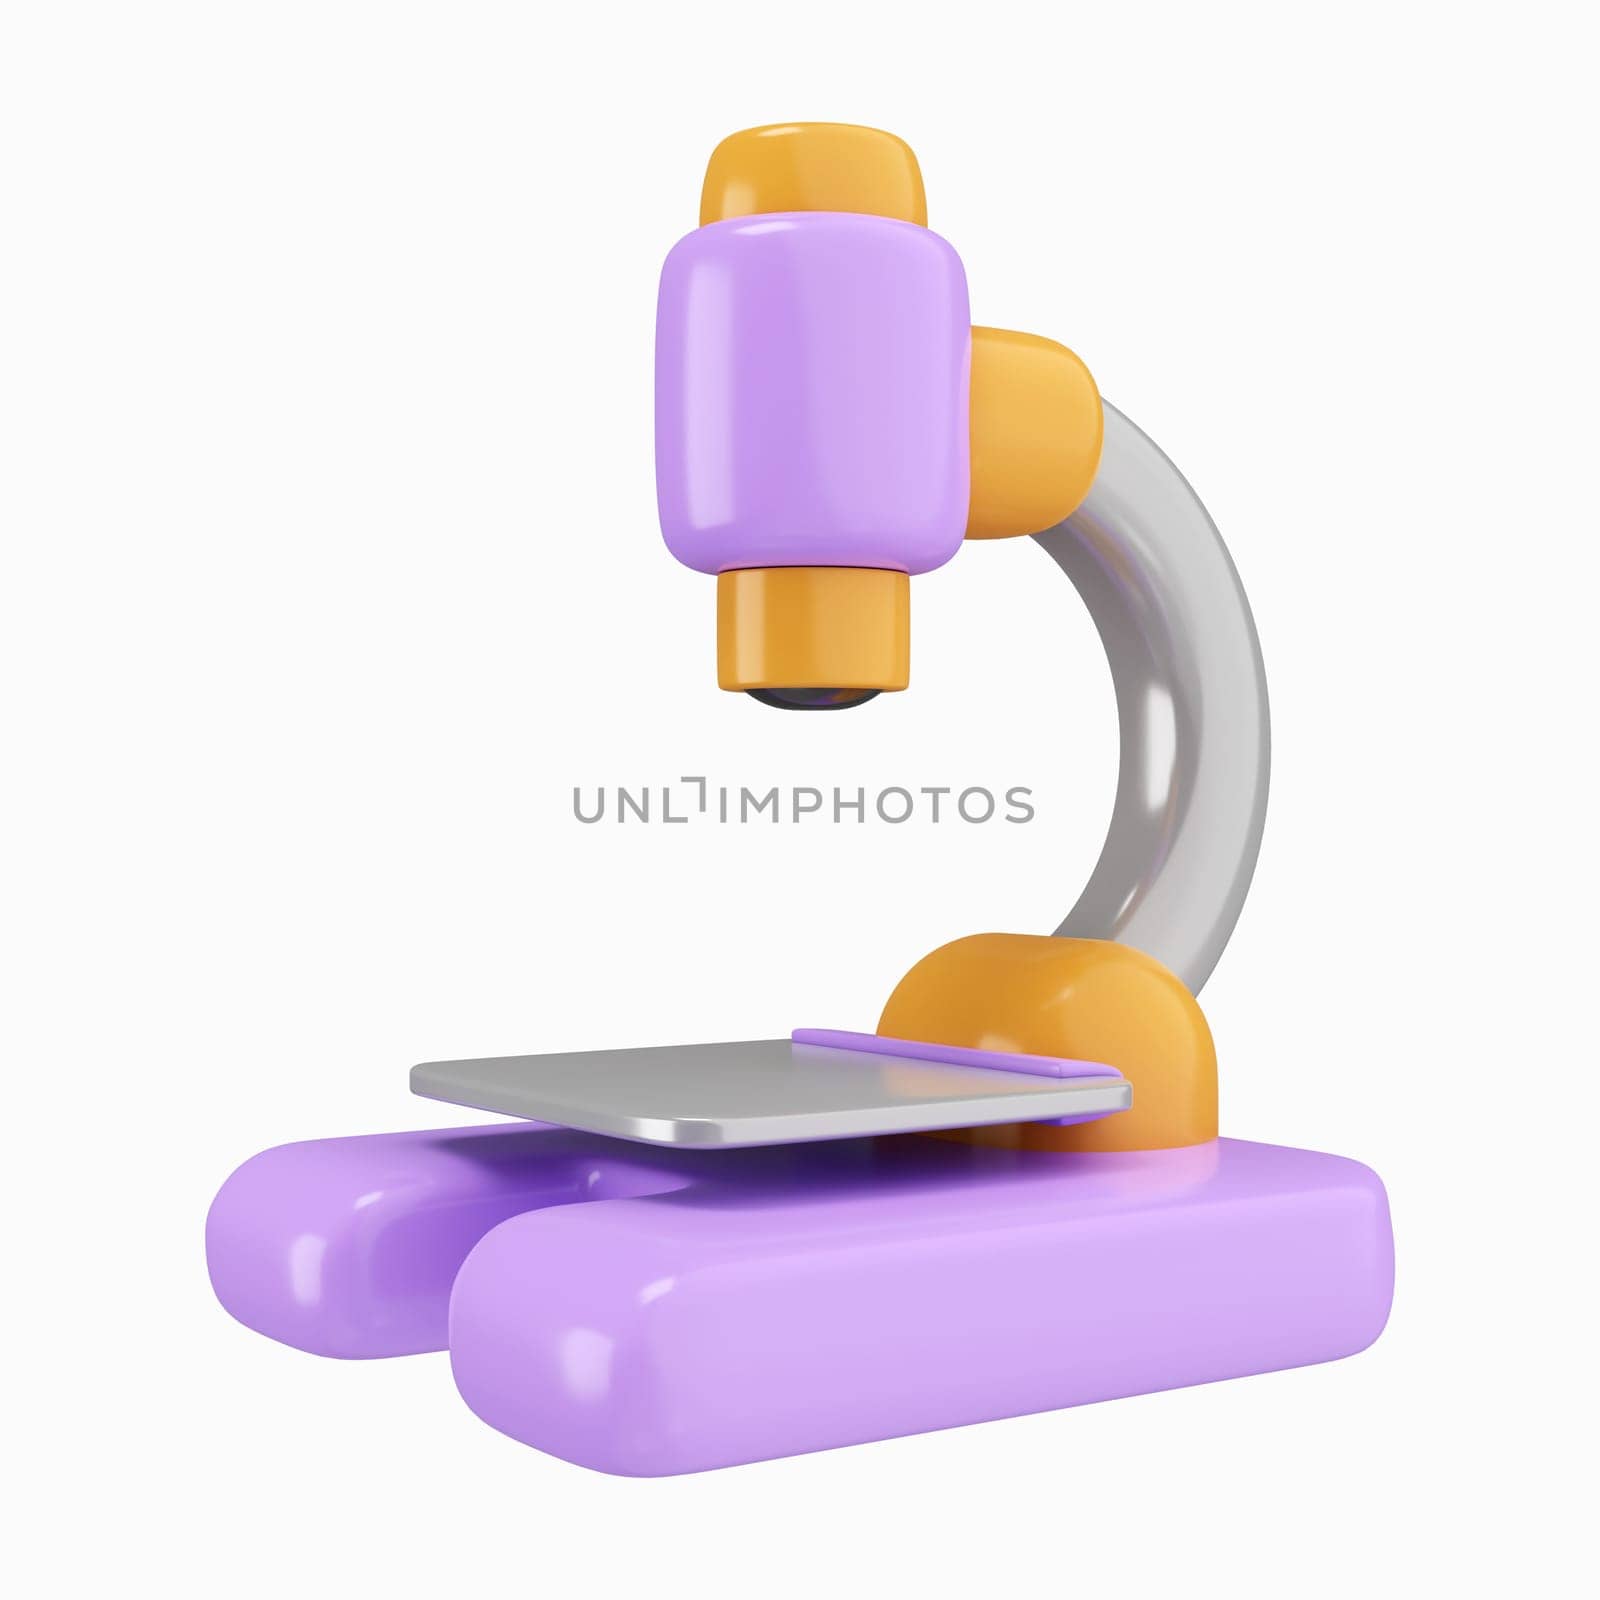 3d Microscope. pharmaceutical instrument, microbiology magnifying tool. icon symbol clipping path. 3d render illustration by meepiangraphic